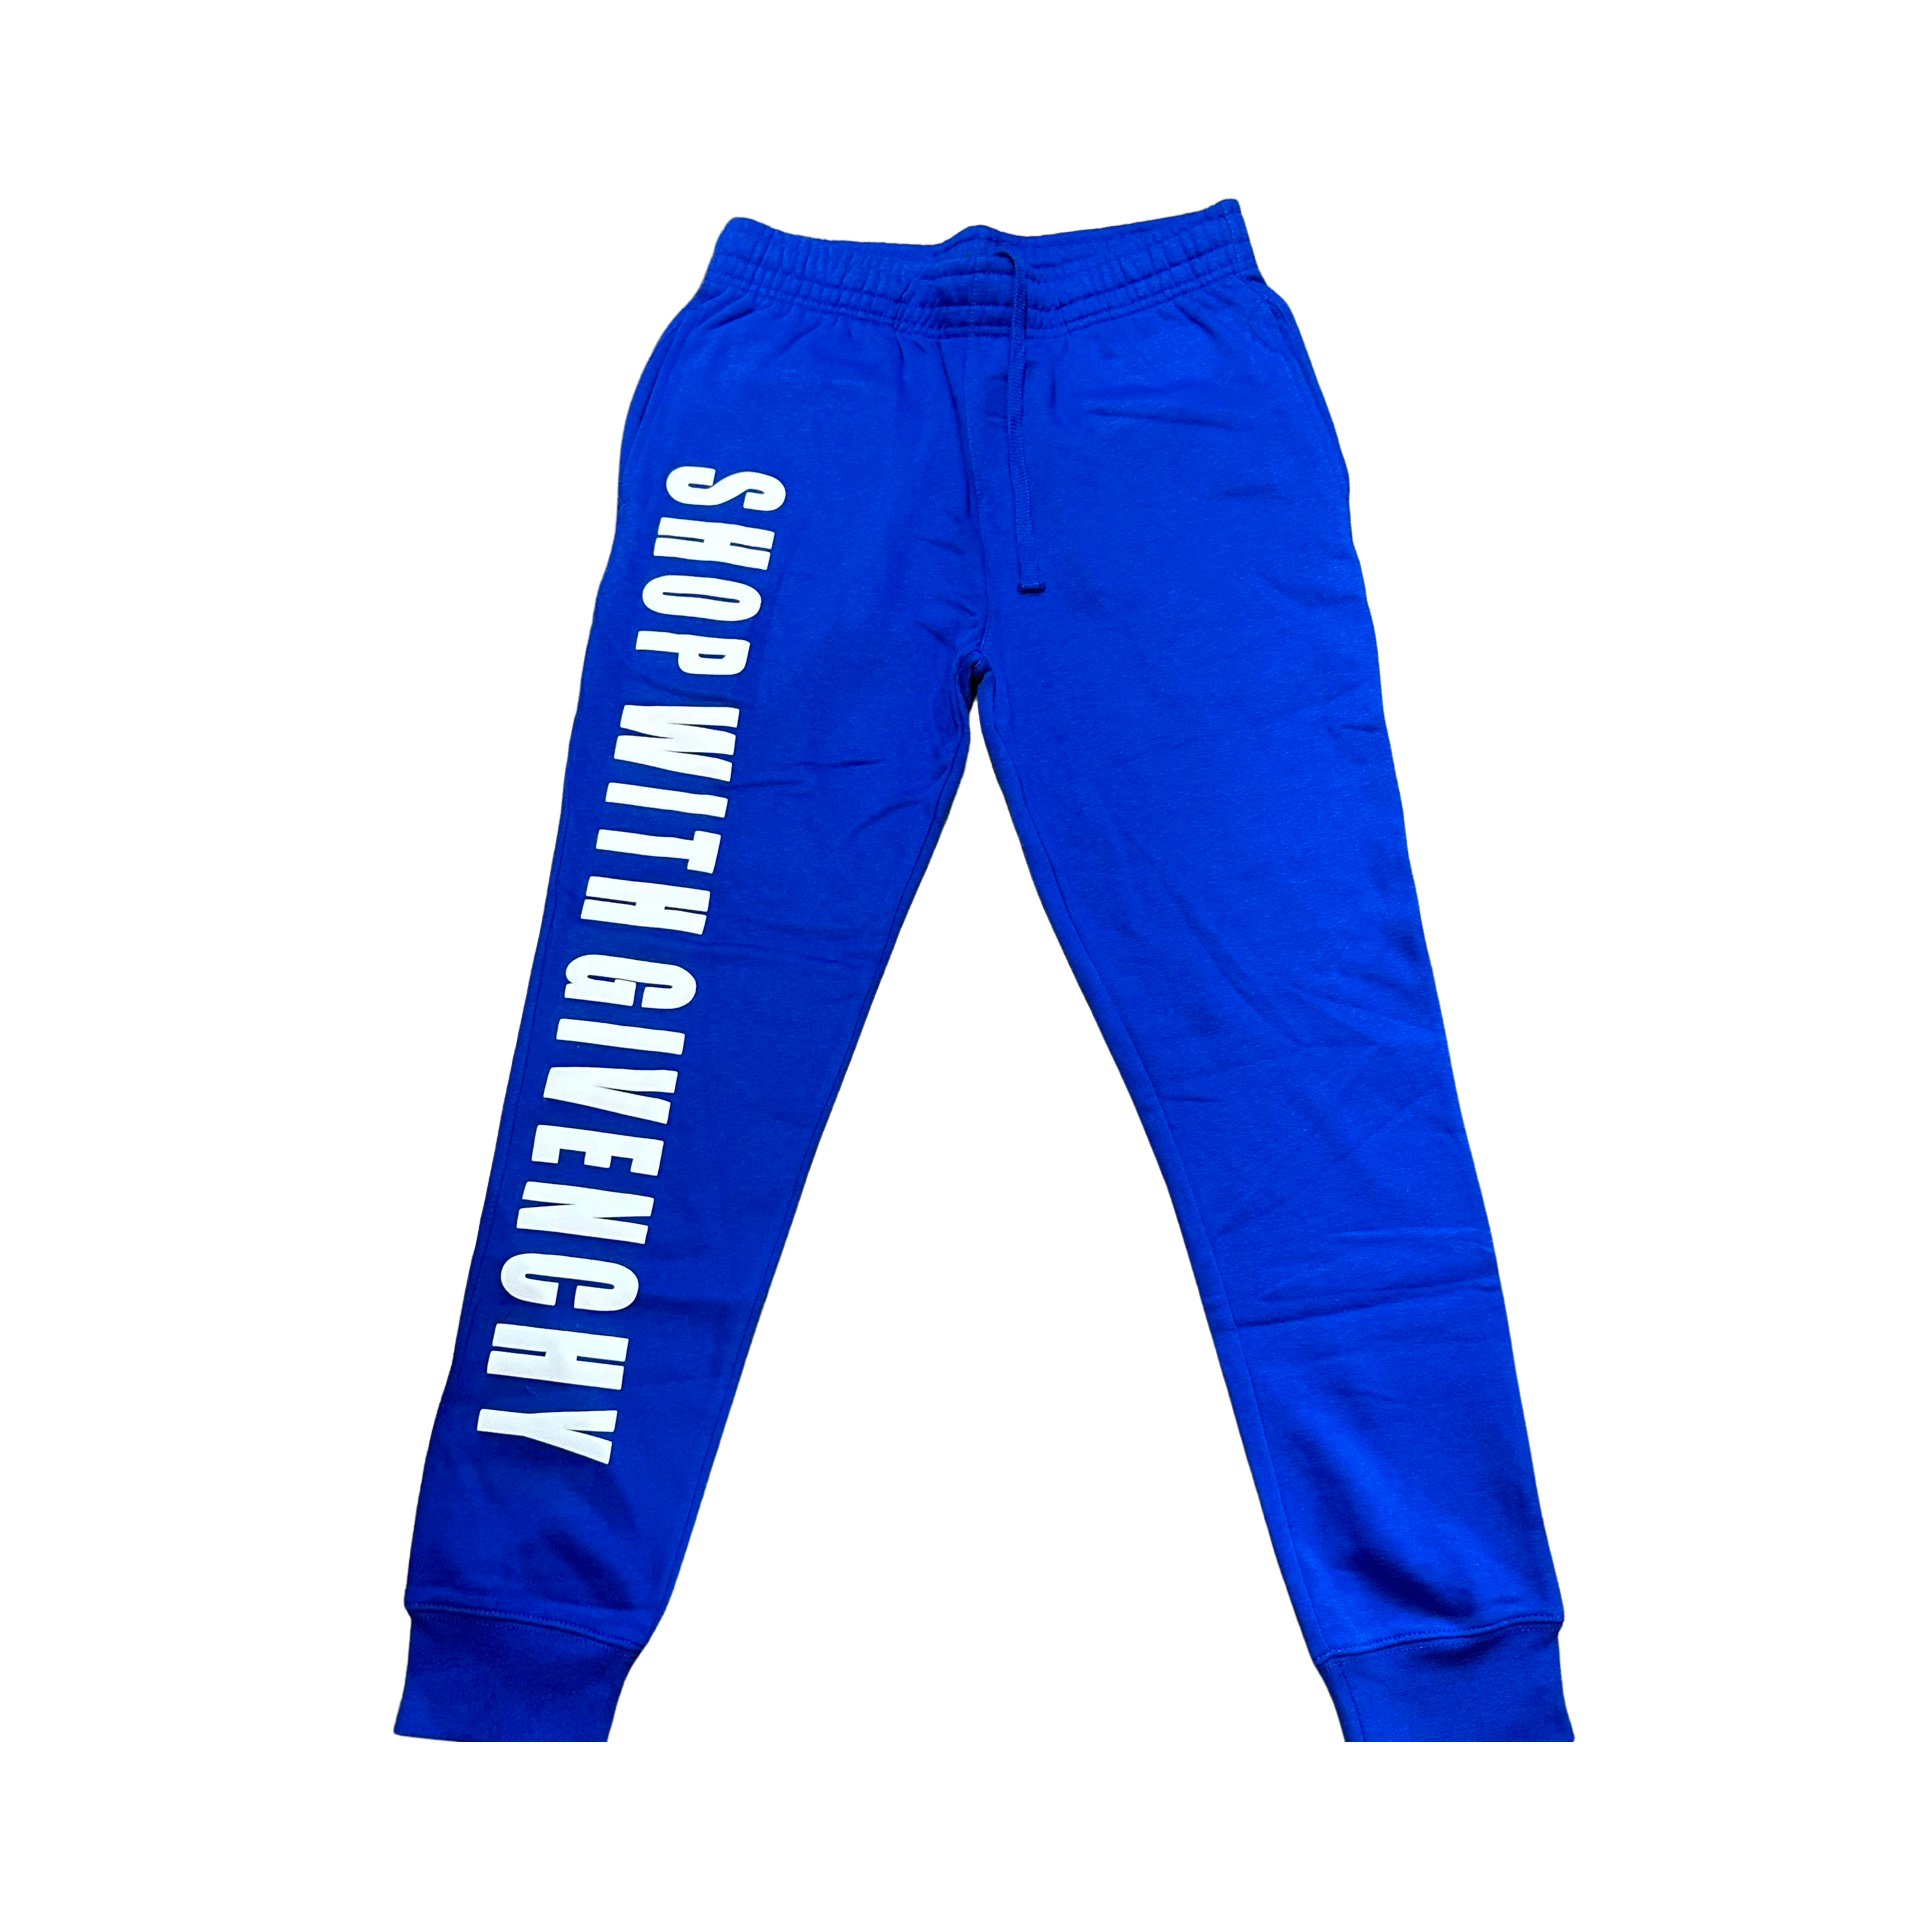 SHOP WITH GIVENCHY MERCH SET ‘ROYAL BLUE’